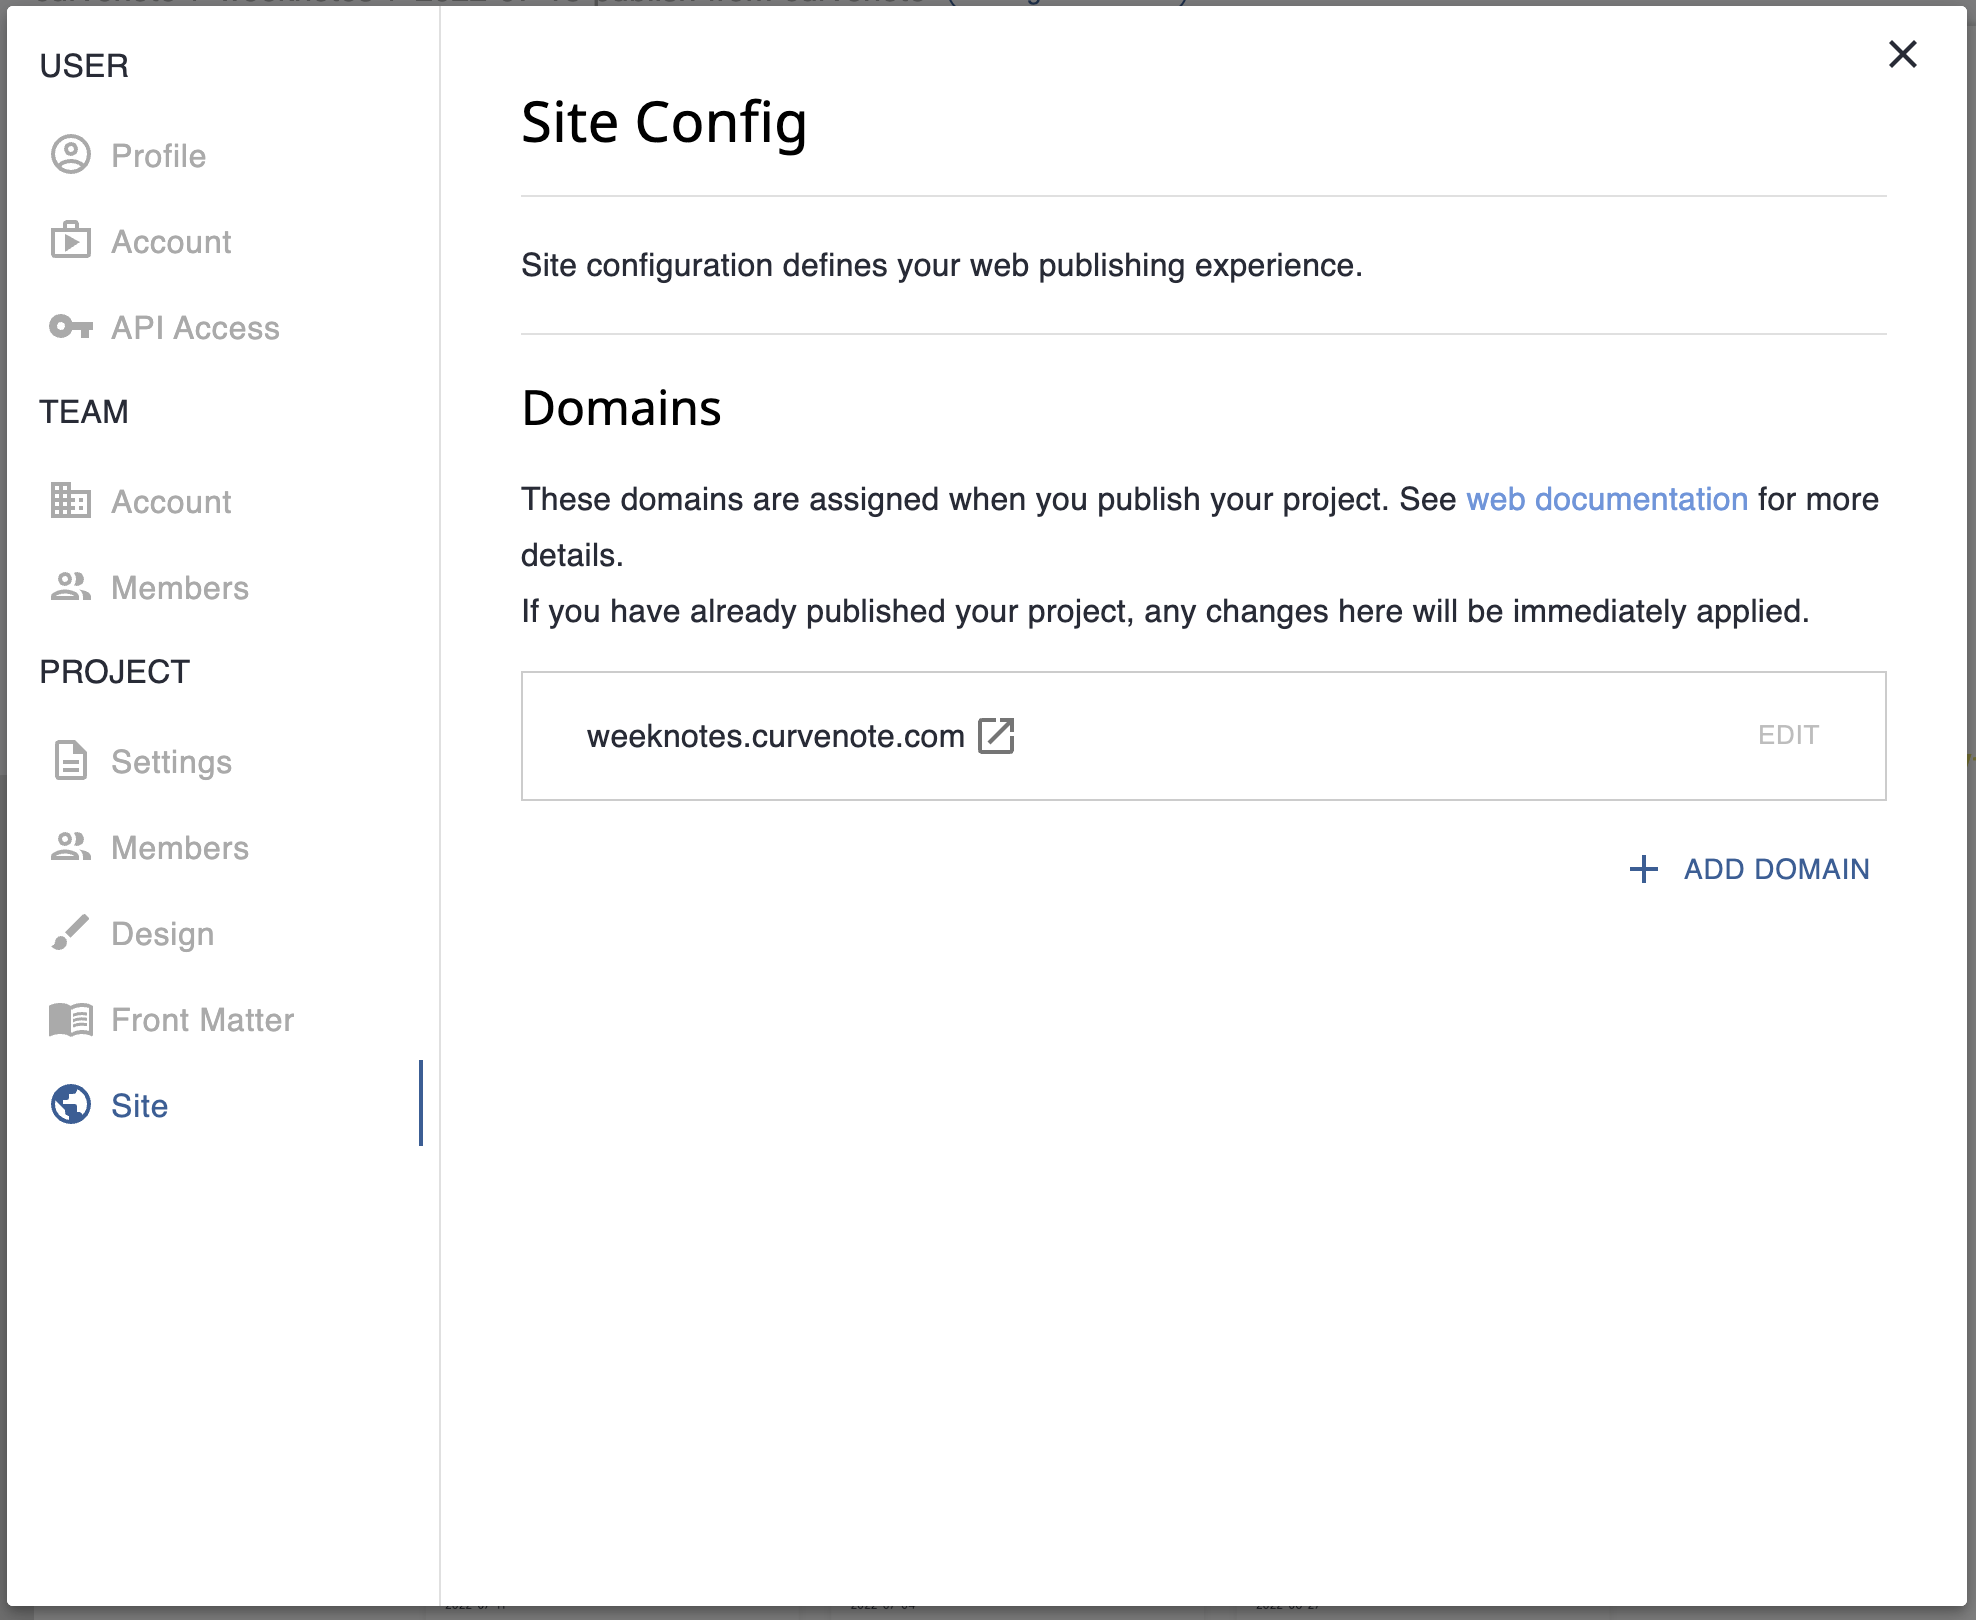 The new Curvenote site settings page where you can add subdomains.